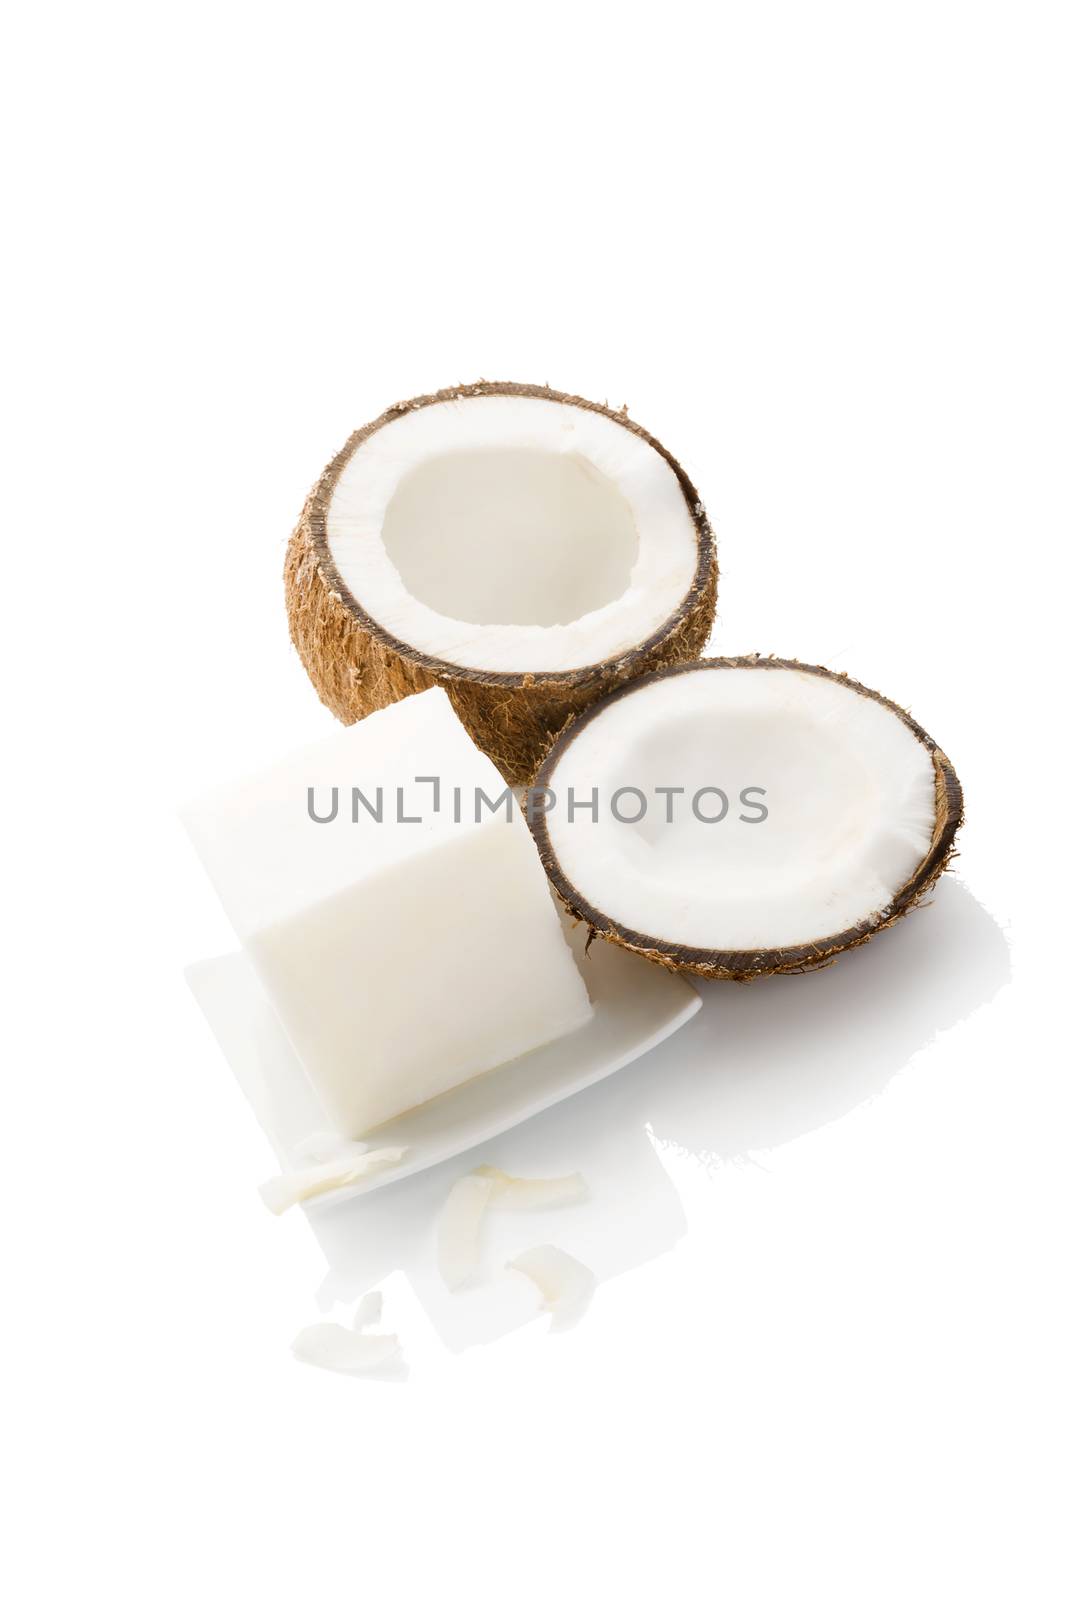 Organic hard coconut oil on plated with coconut isolated on white background. Healthy eating and cooking.